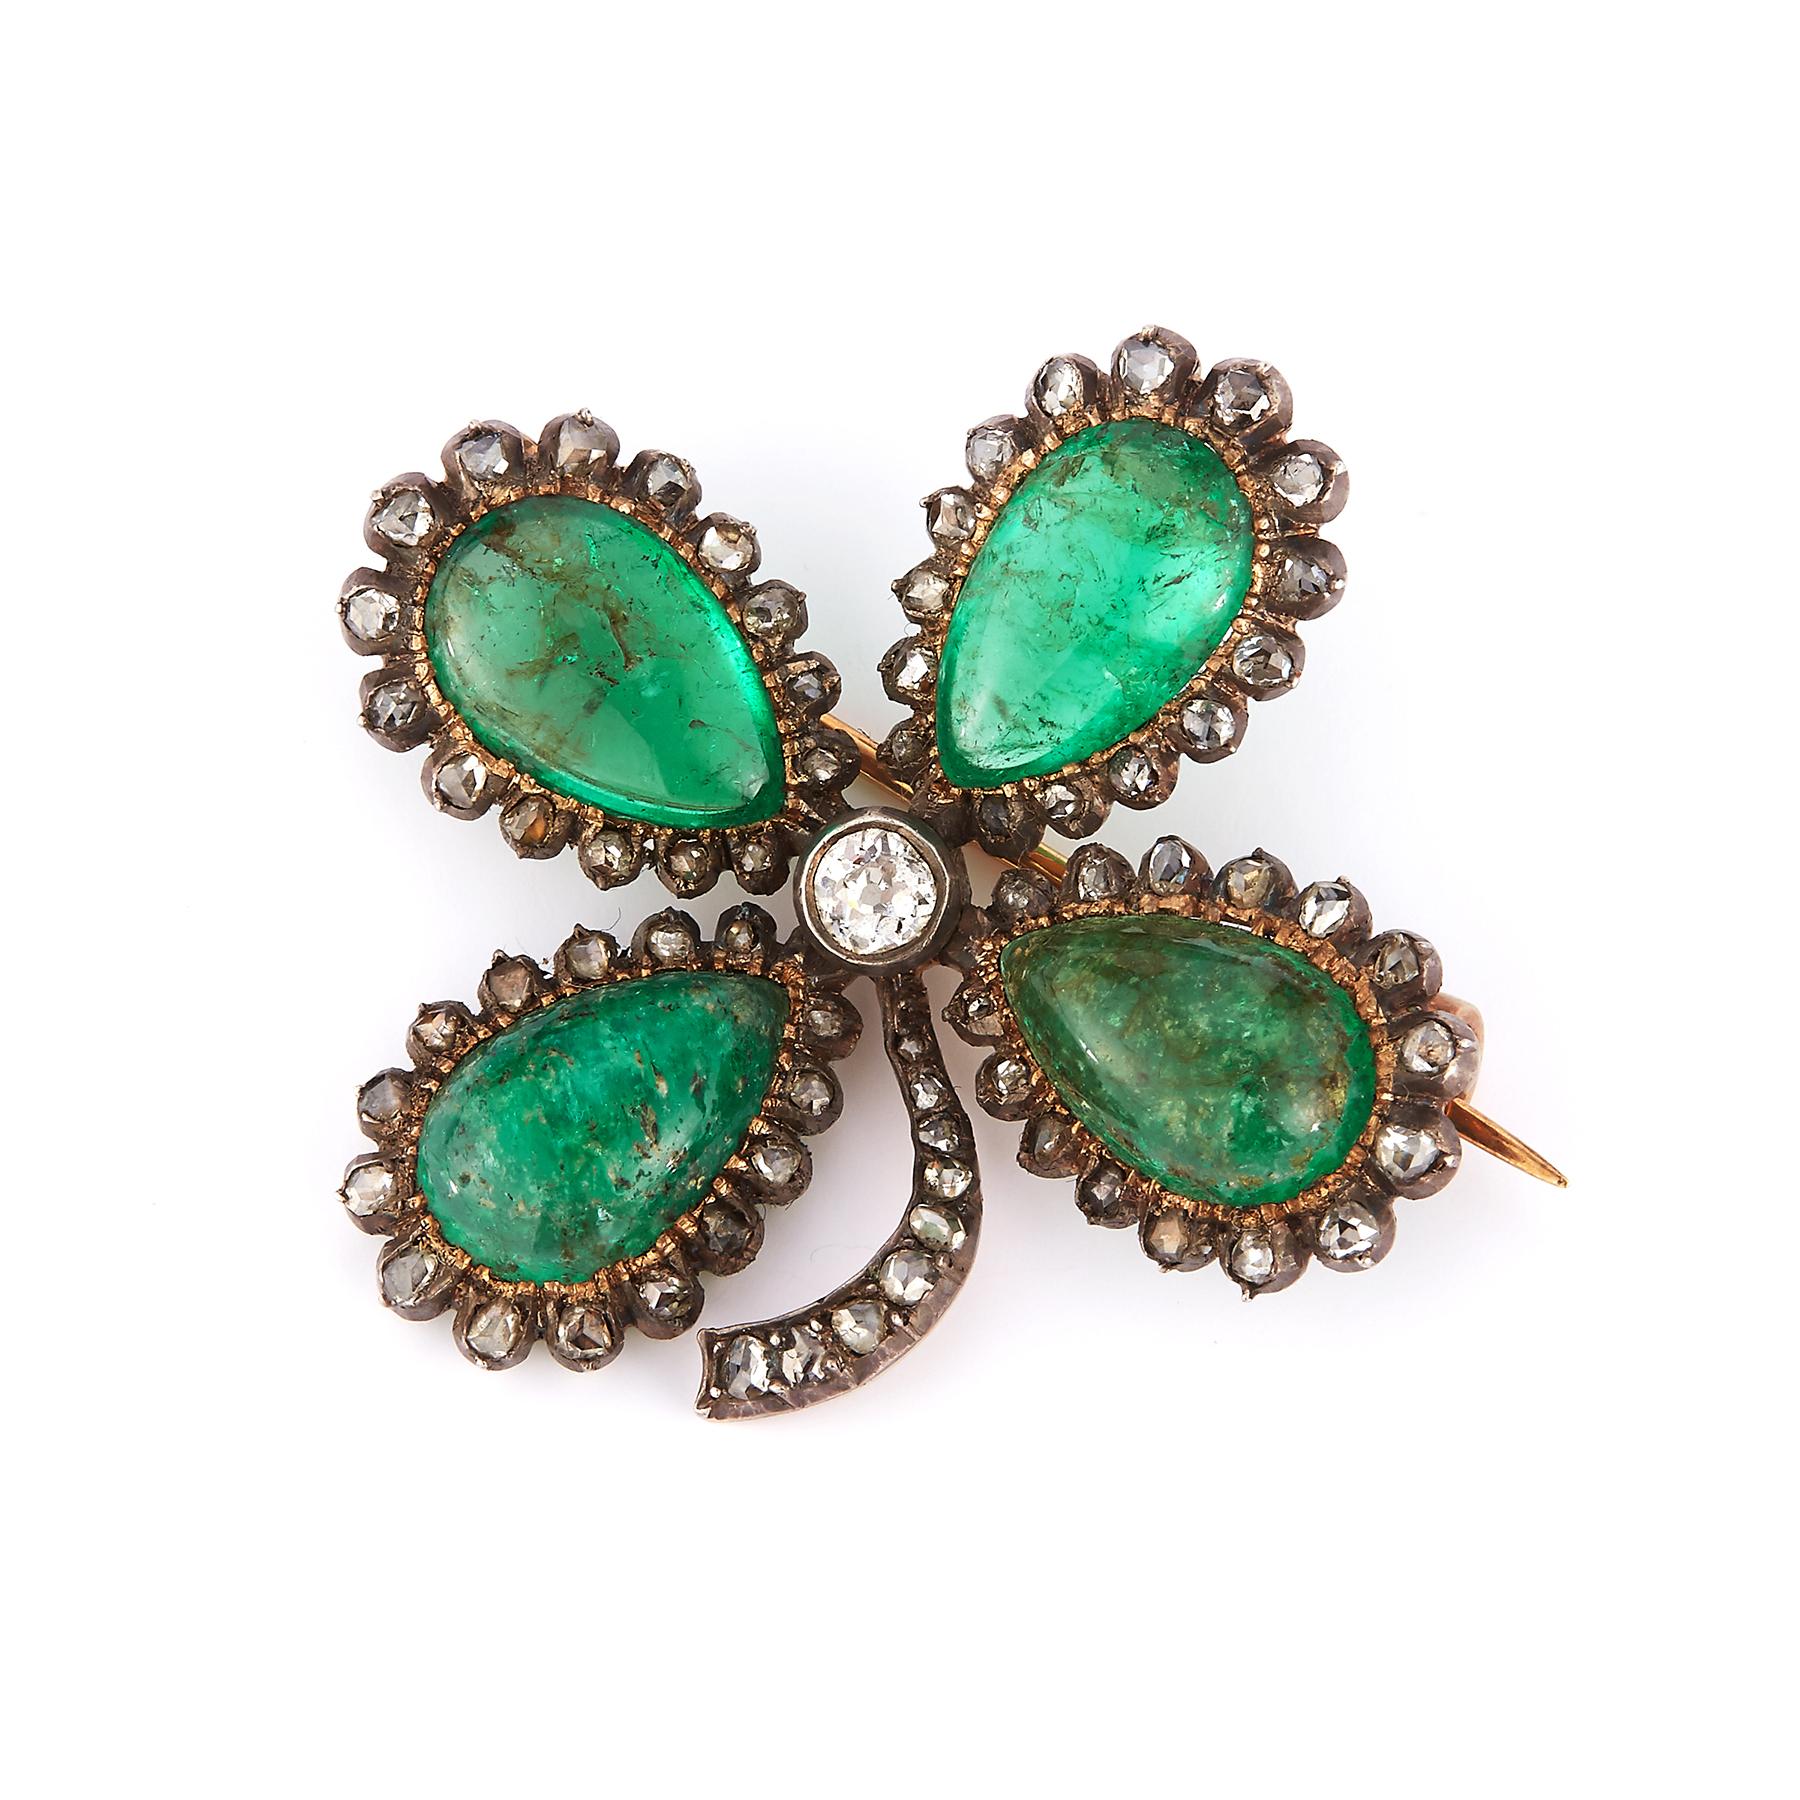 Victorian Cabochon Emerald Four Leaf Clover Brooch

Includes 4 cabochon emeralds surrounded by an array of diamonds 

Antique

Measurements: Approximately 1.50 x 1.50 Inches
